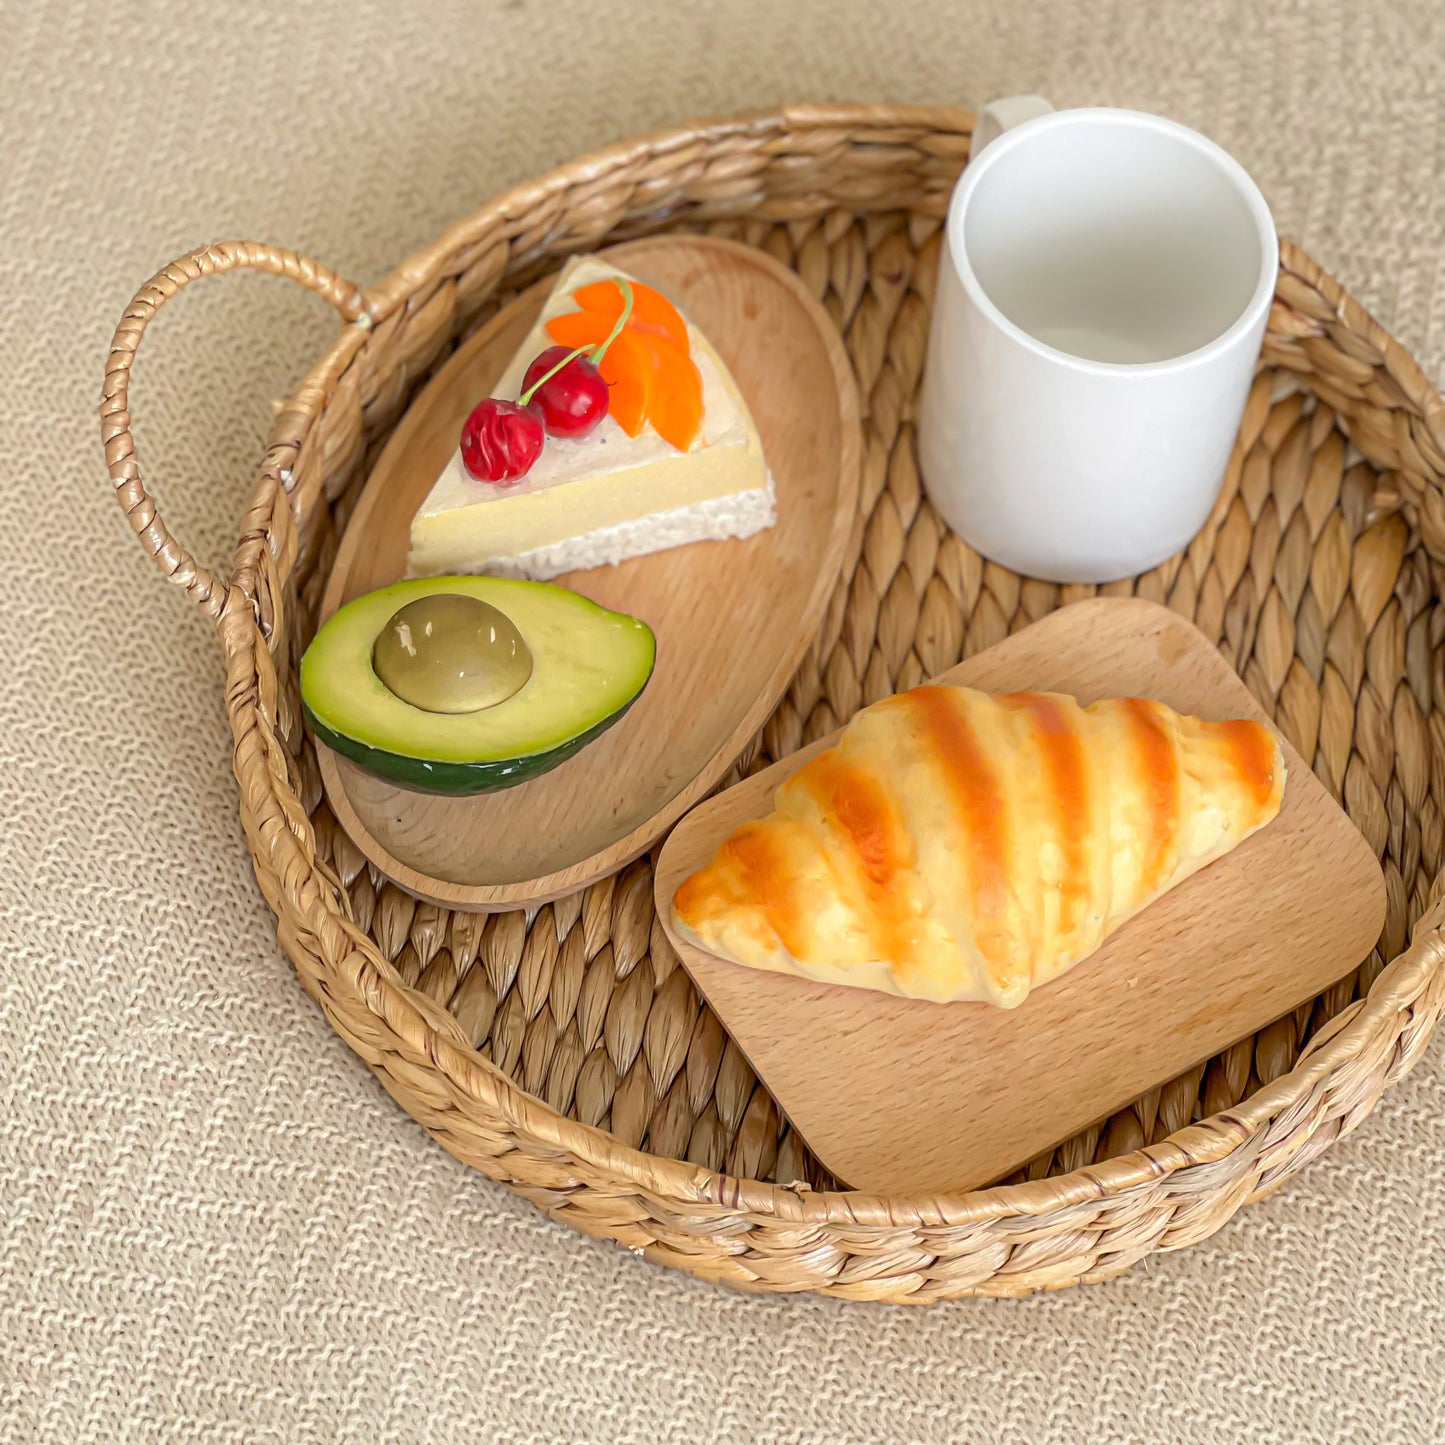 Tea cake tray for living room decoration